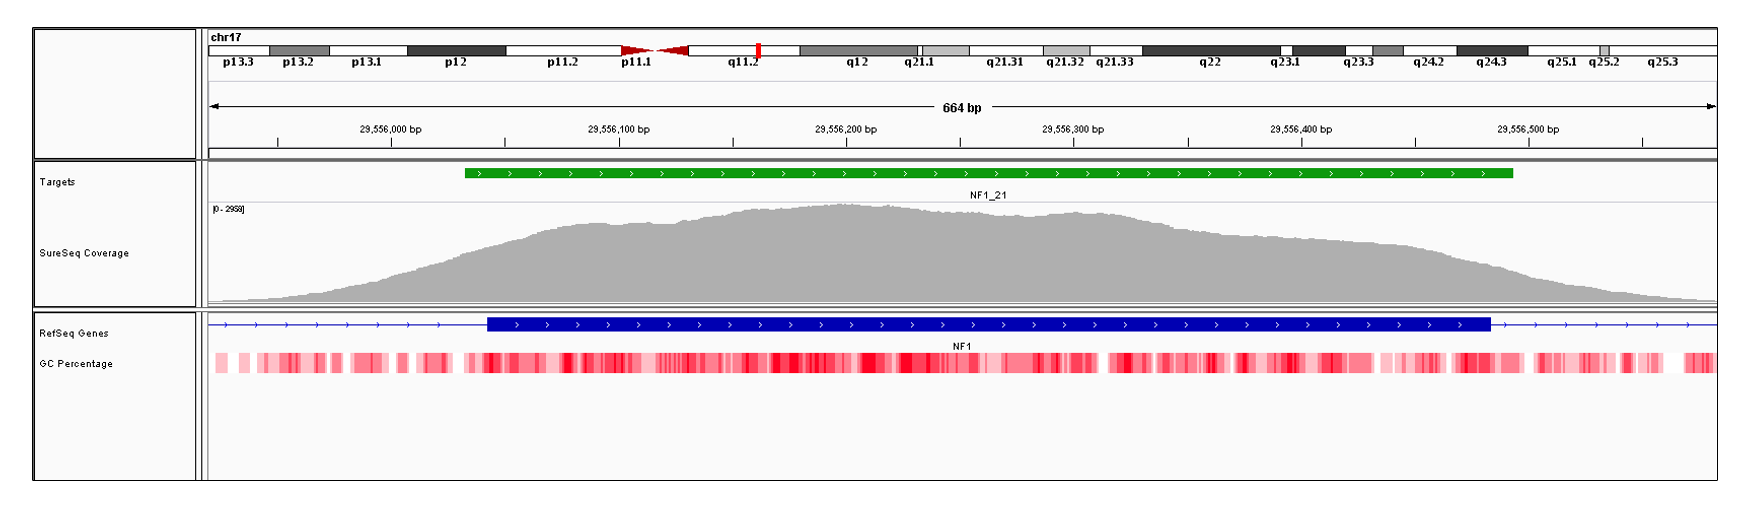 NF1 Exon 21 (hg19 chr17:29556043-29556483). Depth of coverage per base (grey). Targeted region (green). Gene coding region as defined by RefSeq (blue). GC percentage (red). Image